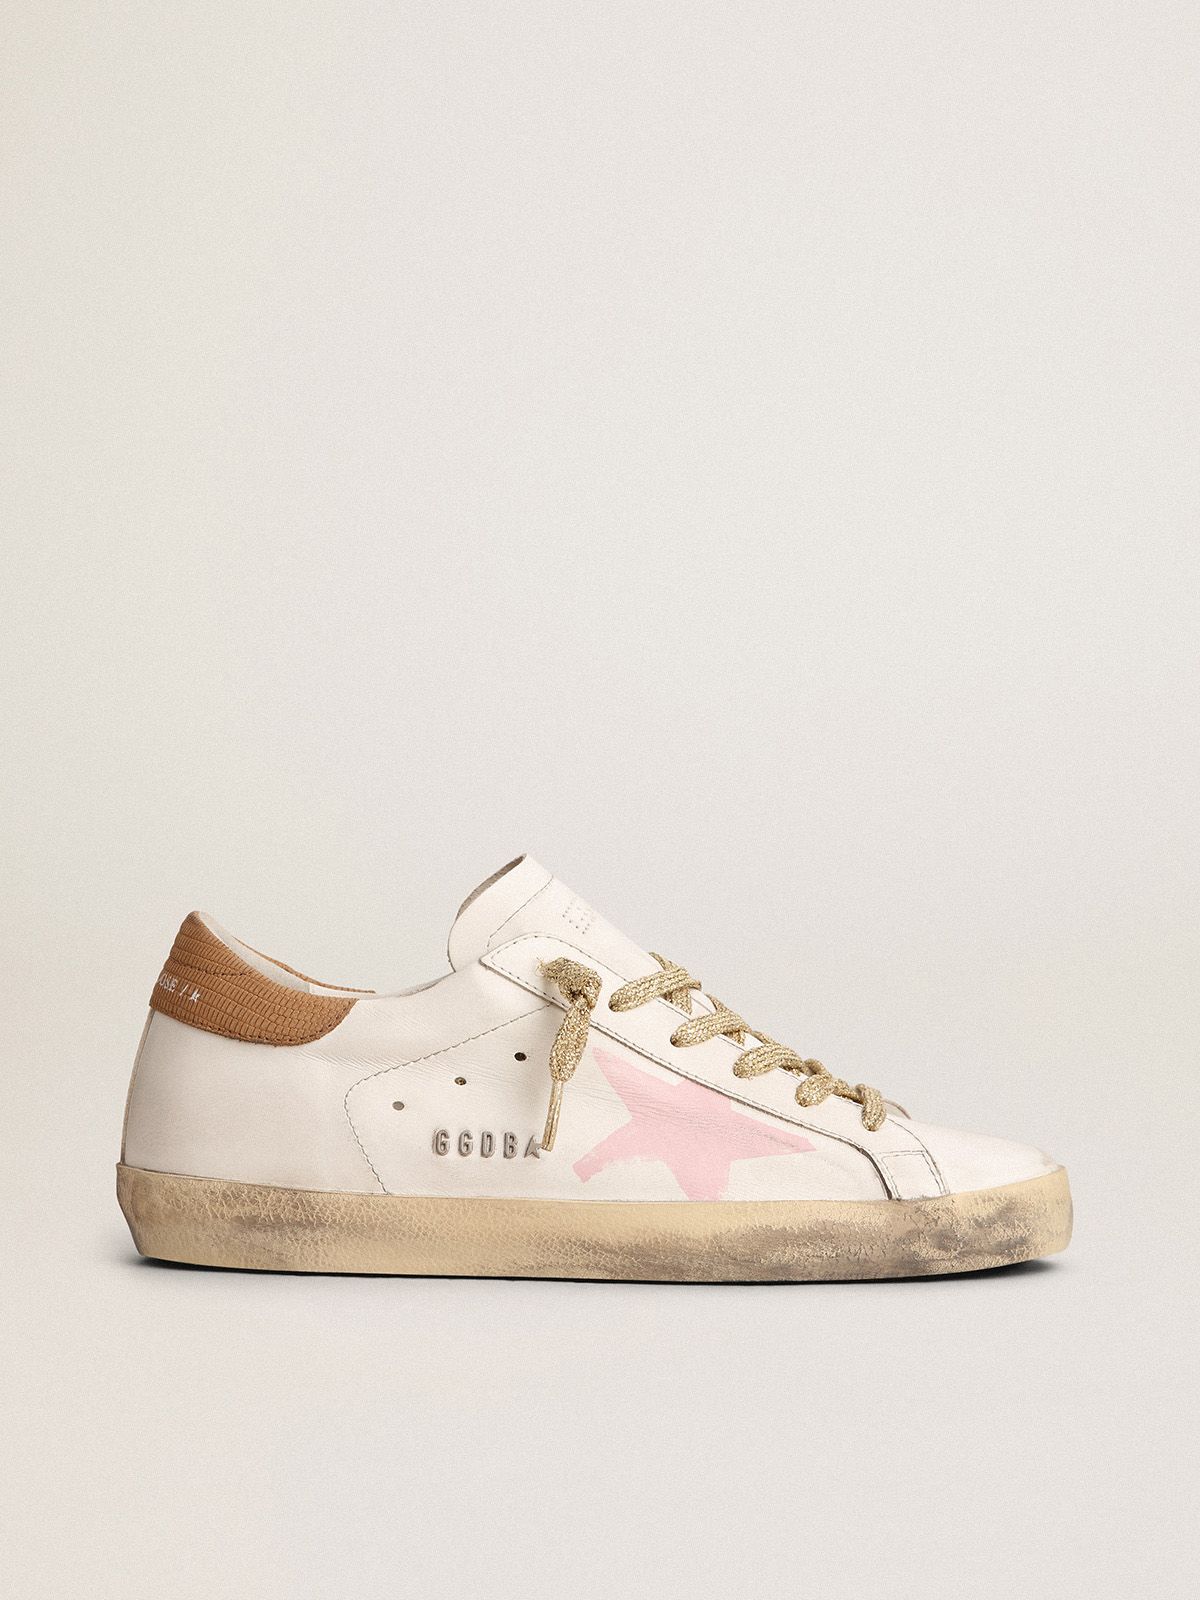 Super-Star LTD sneakers with pink screen printed star and snake-print leather heel tab